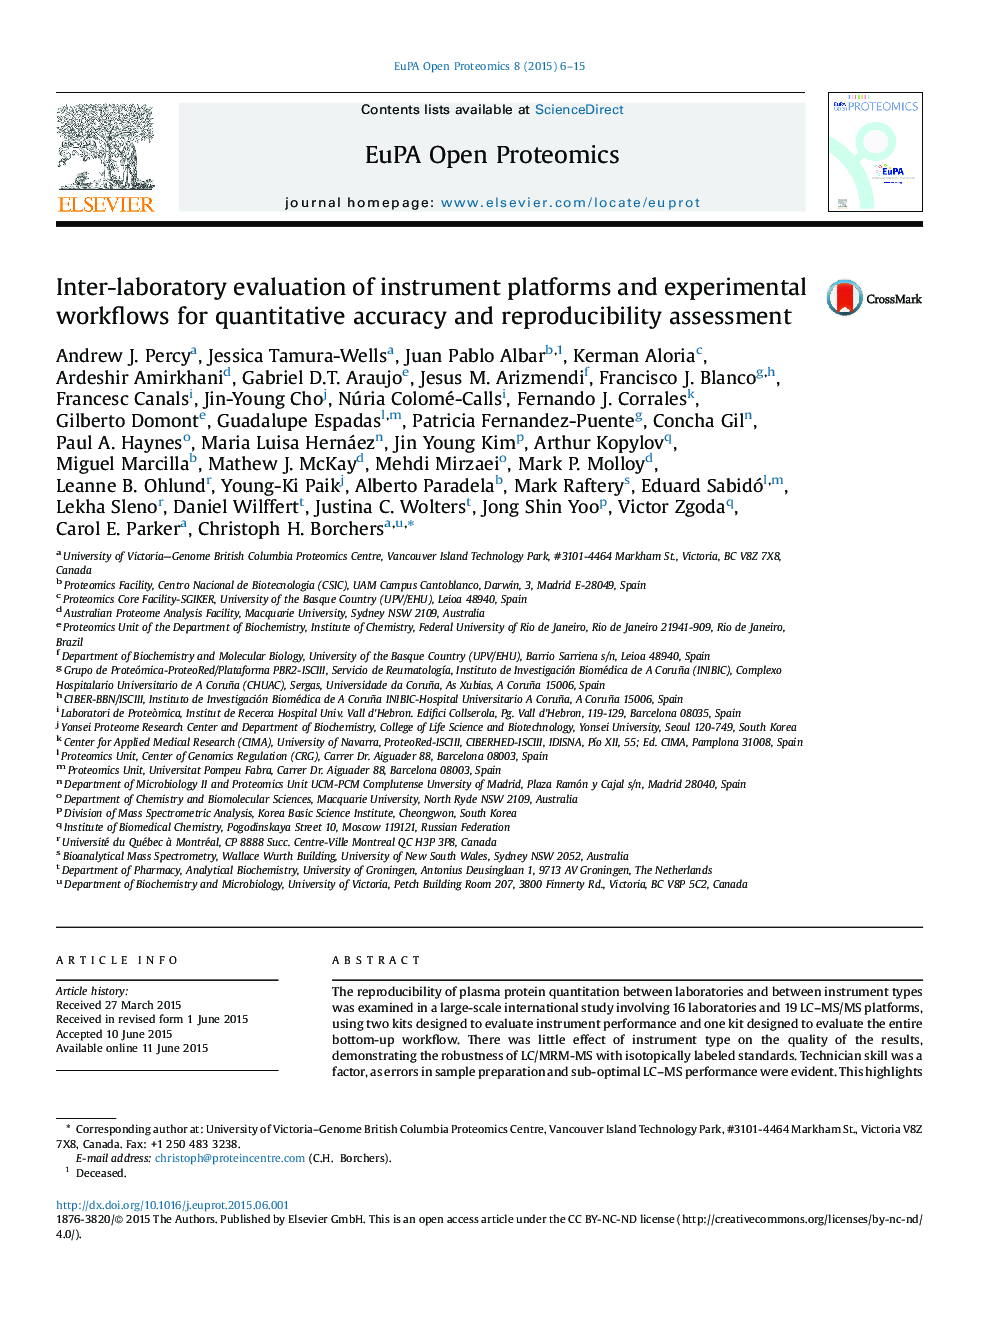 Inter-laboratory evaluation of instrument platforms and experimental workflows for quantitative accuracy and reproducibility assessment